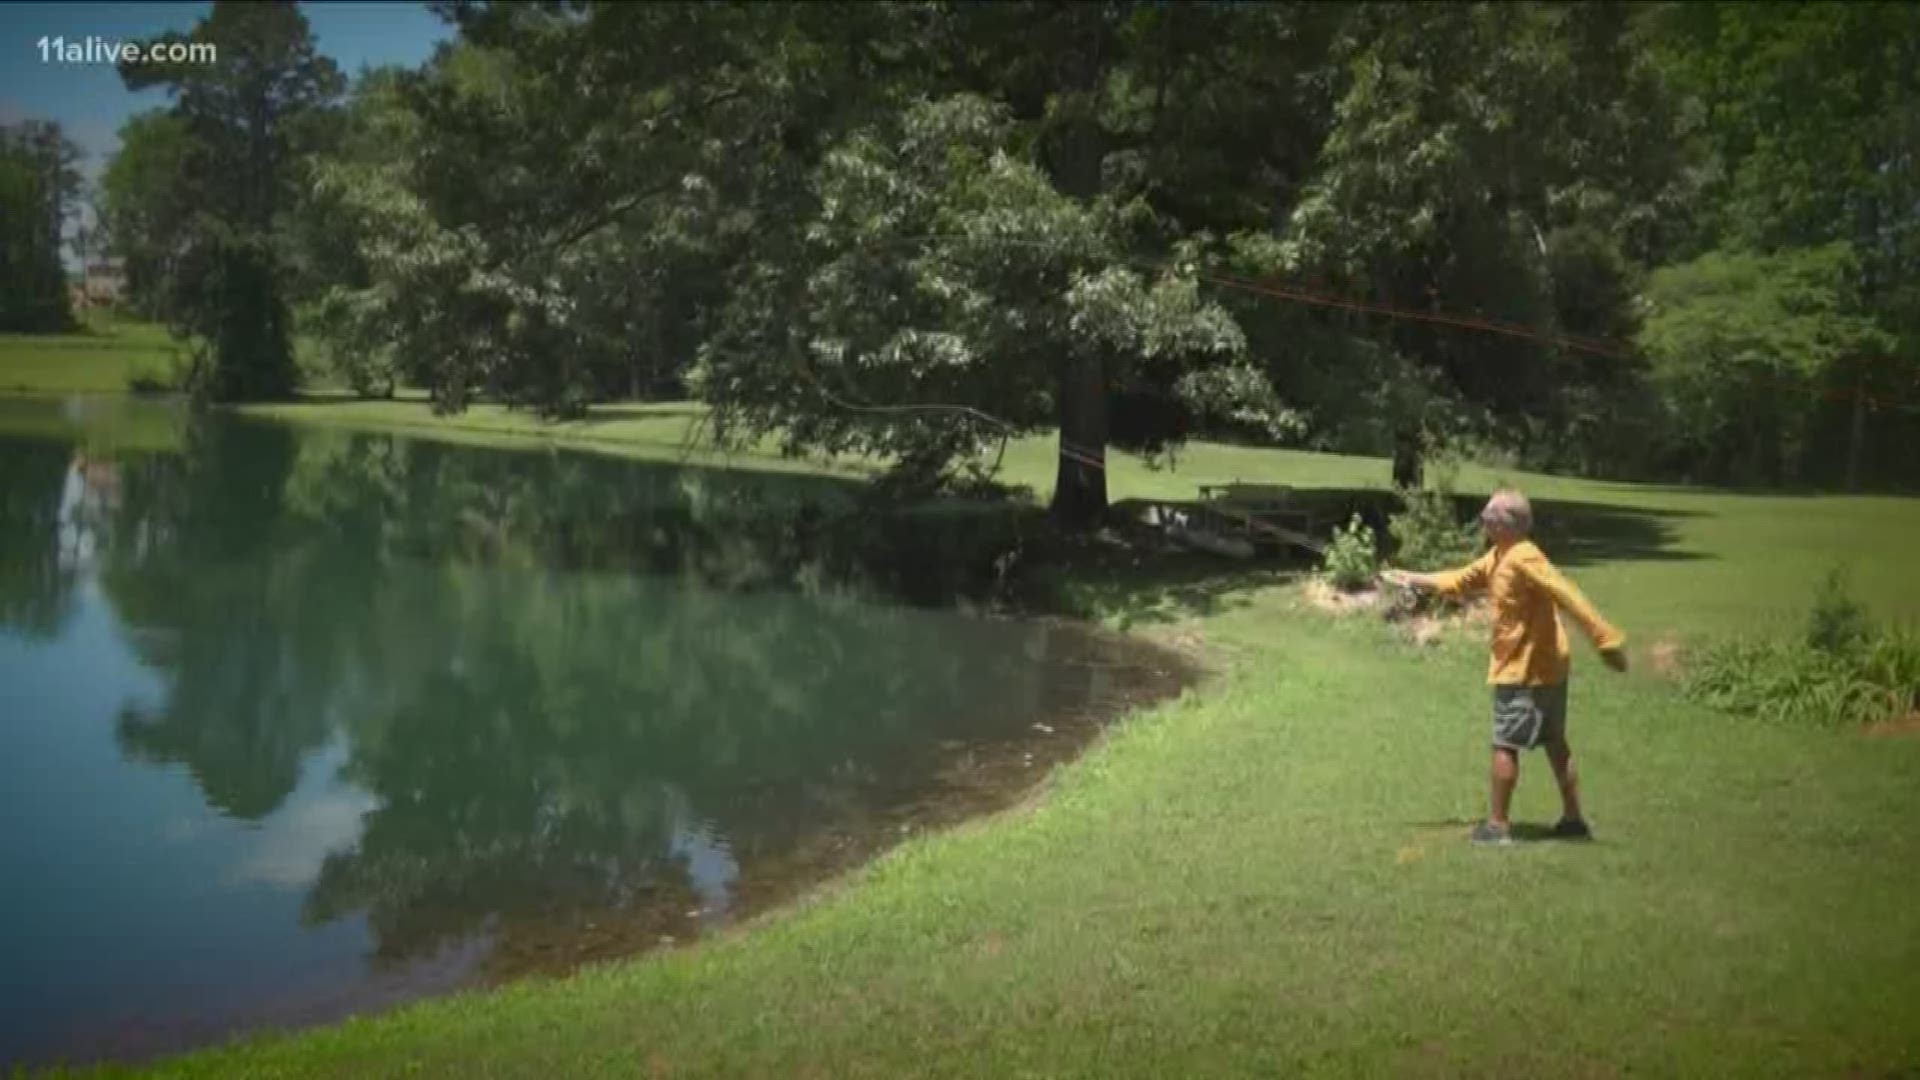 If you've never held a rod before, don't worry --this school will teach you all of the skills you need to know about fly fishing.